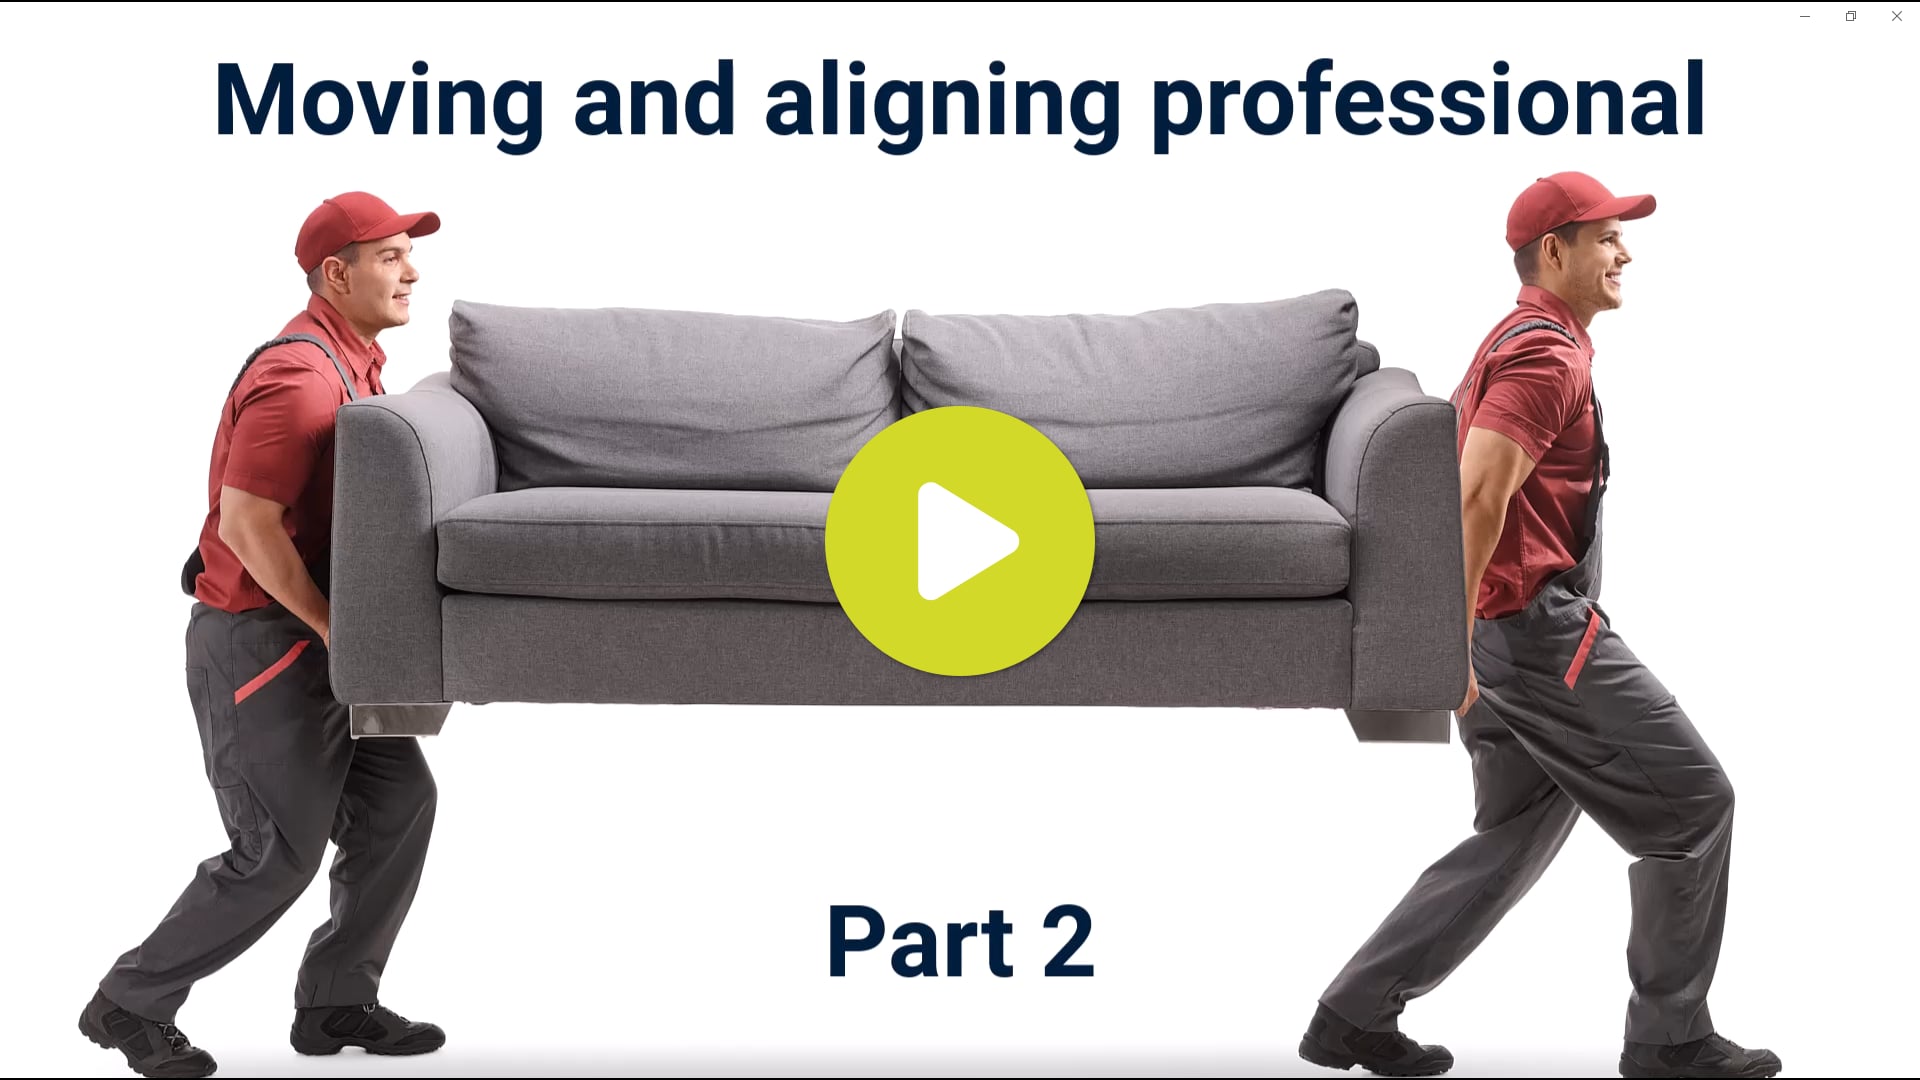 Moving and aligning - Part 2 Professional